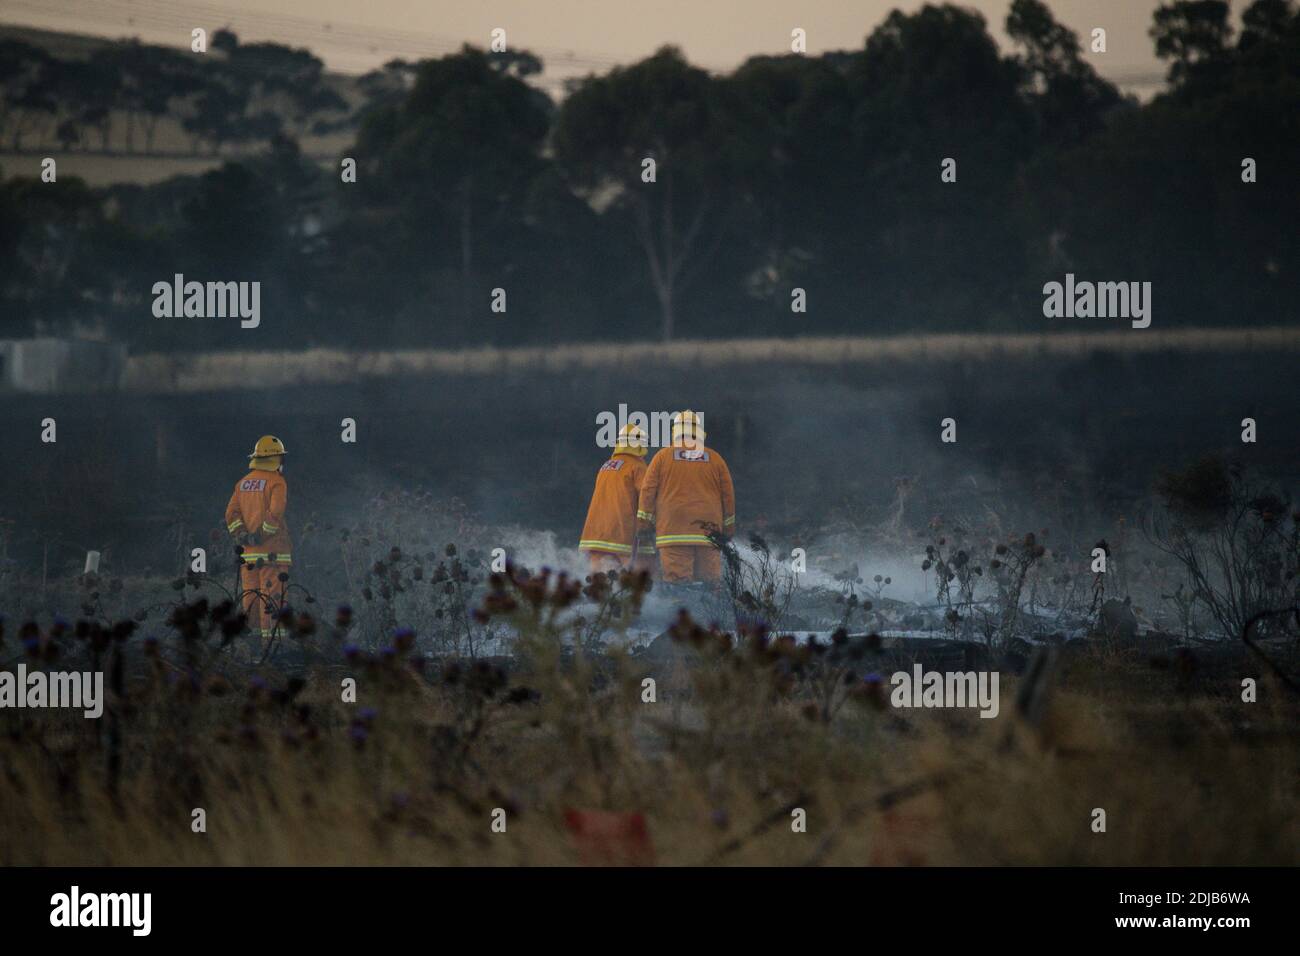 Melbourne, Australia 14 Dec 2020, A County Fire Authority fire crew works to black out the last flames of a major grass fire. Fire Services used aircraft and fire crews to control a 110 hectare grass fire on Melbourne's outer west that destroy several sheds and cars. Stock Photo